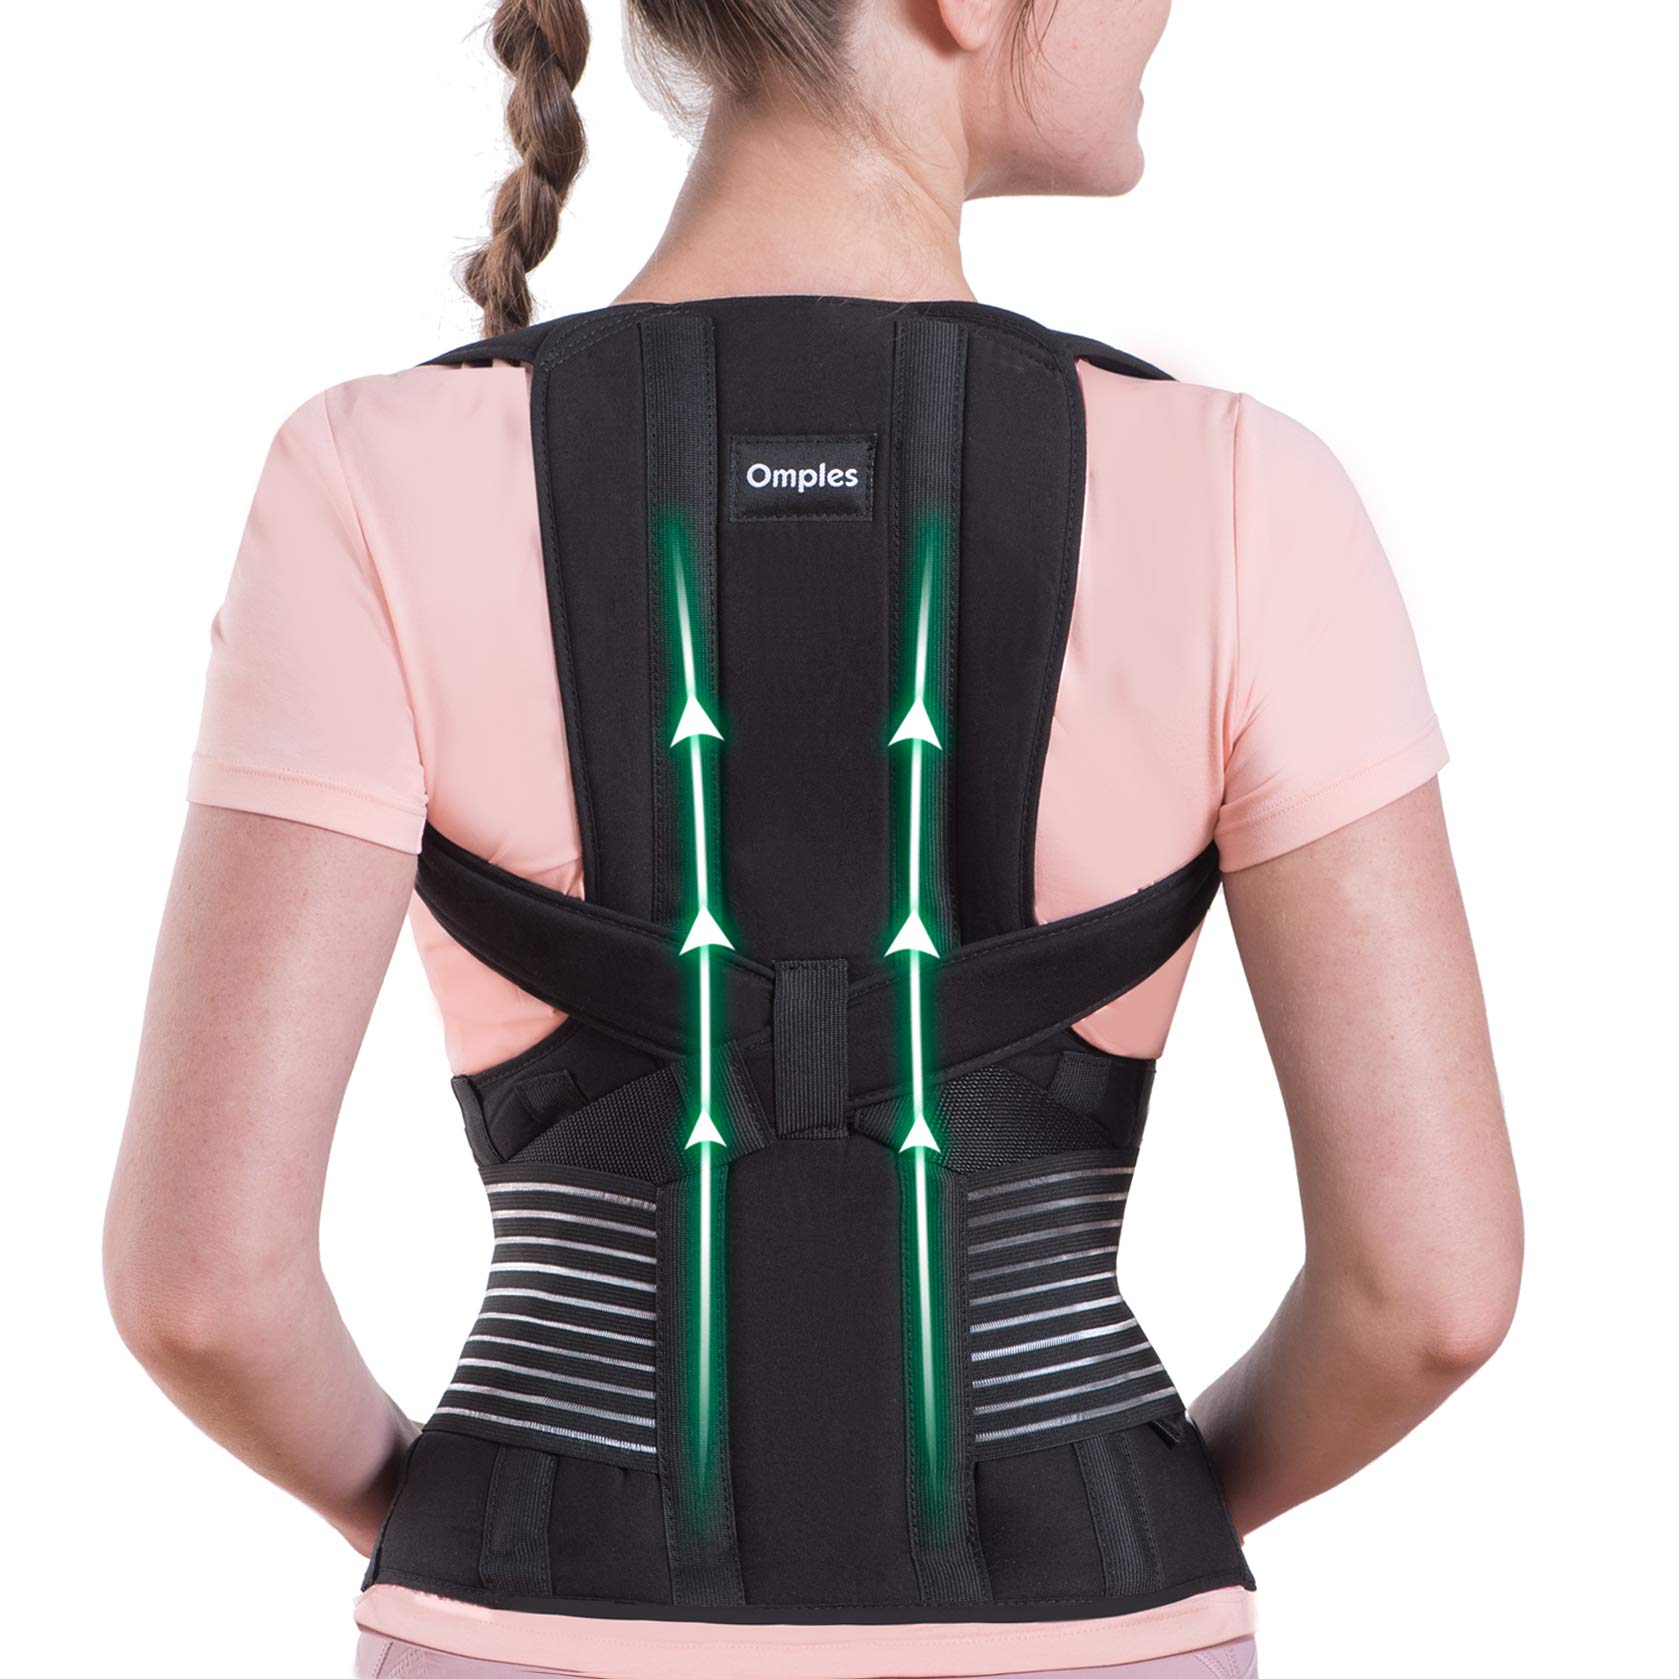 TOROS-GROUP Comfort Posture Corrector and Back Support Brace / 100